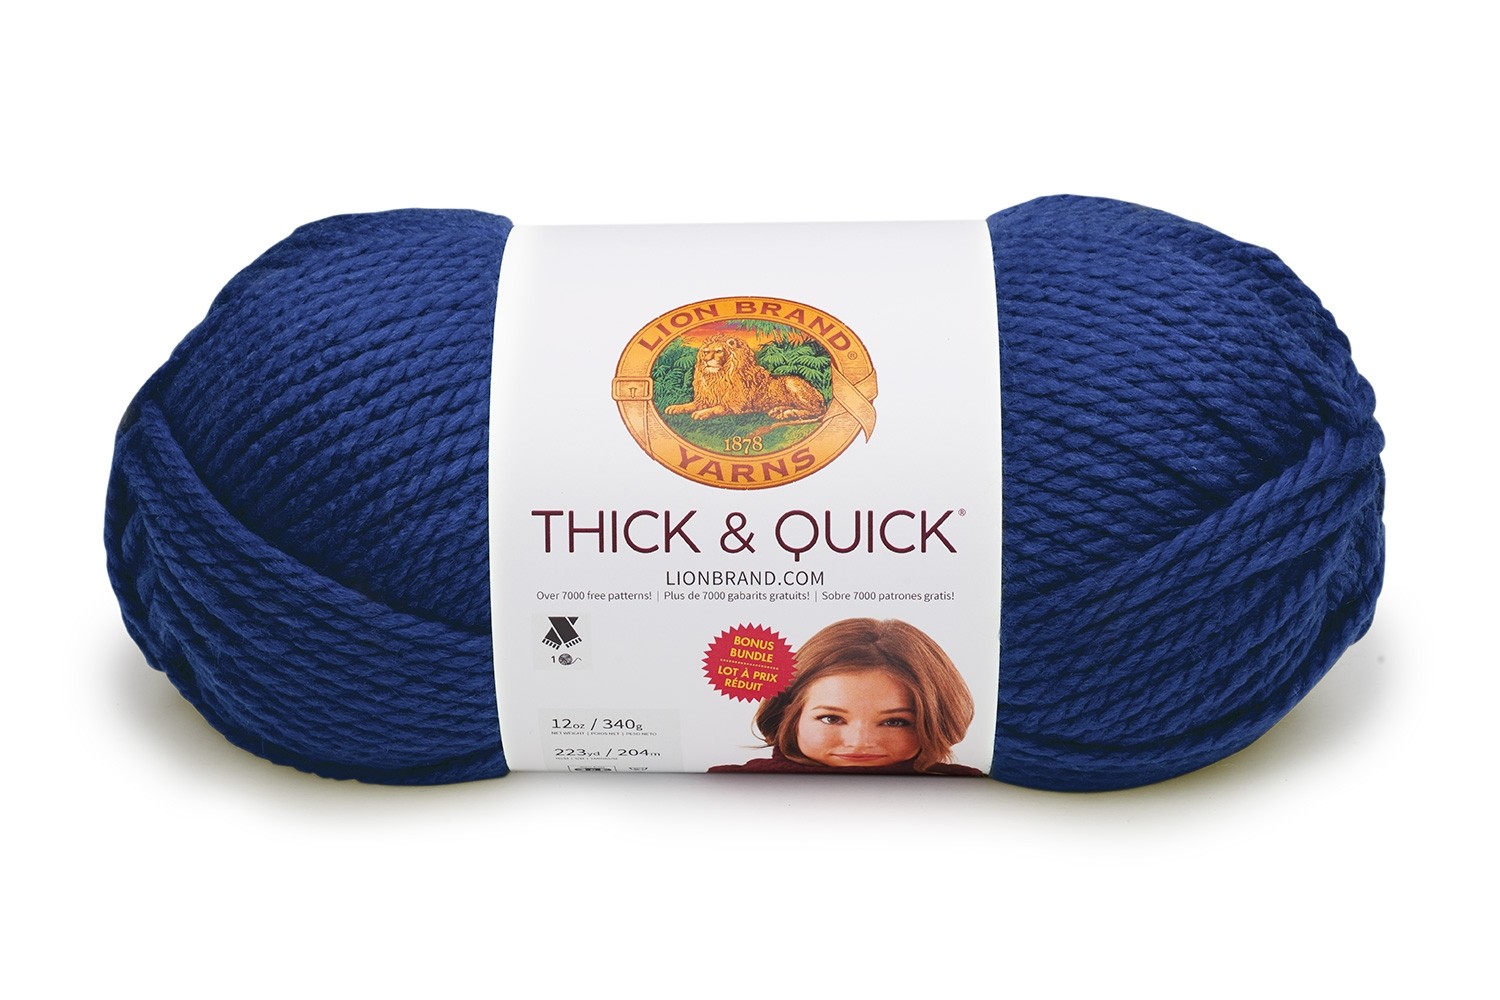 Thick & Quick in Navy